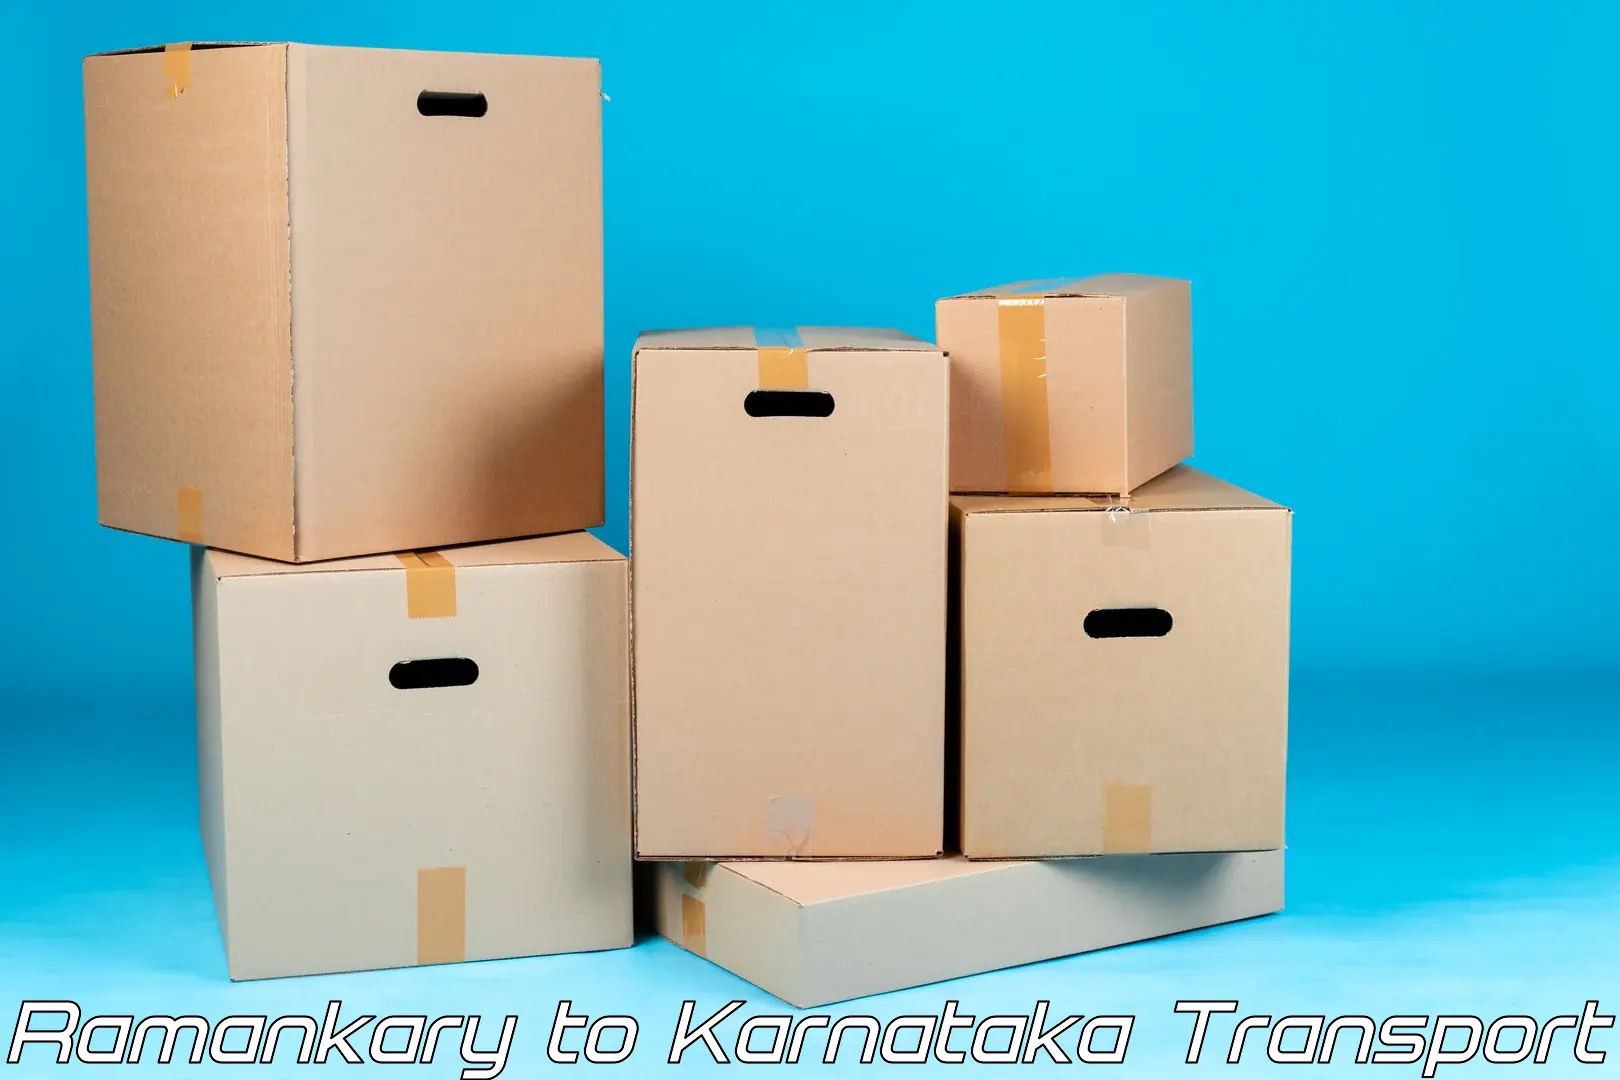 Container transportation services Ramankary to Koppal